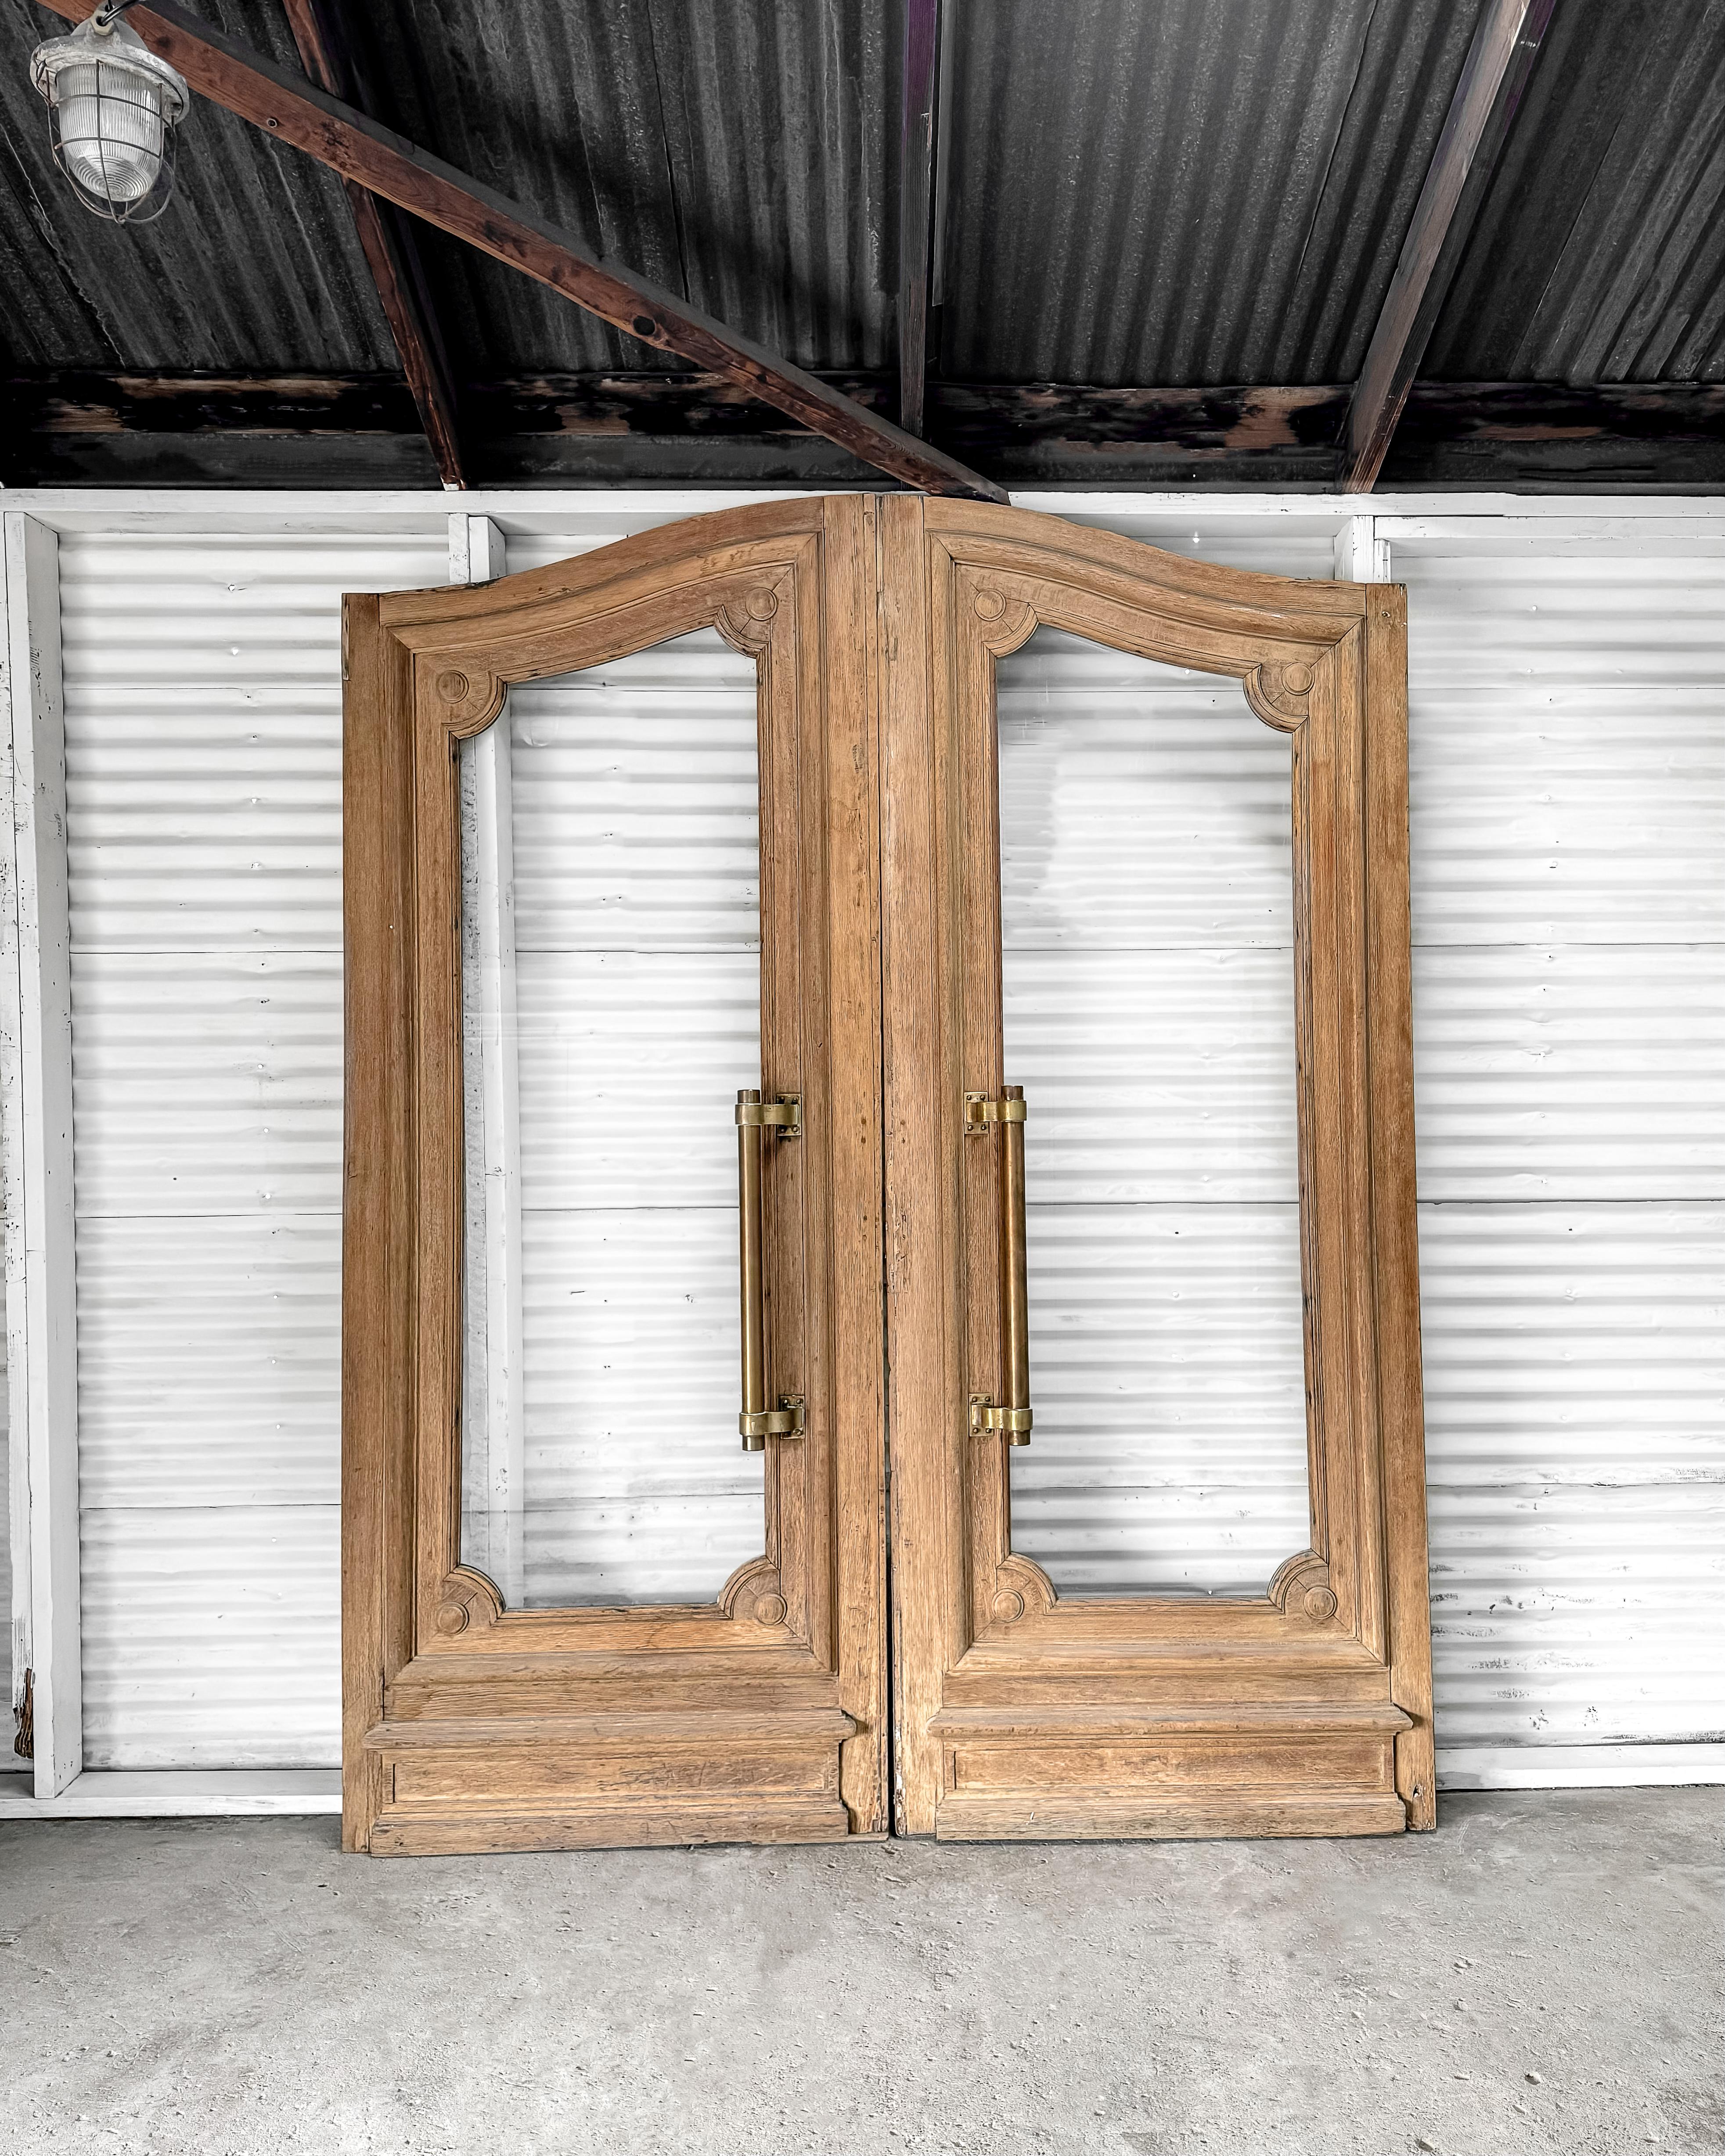 An impressive pair of salvaged exterior doors from a banking facility in France with a graceful “mustache” arched top and natural wood finish. Each door showcases a single continuous lite framed with beveled molding, meticulously shaped to mirror